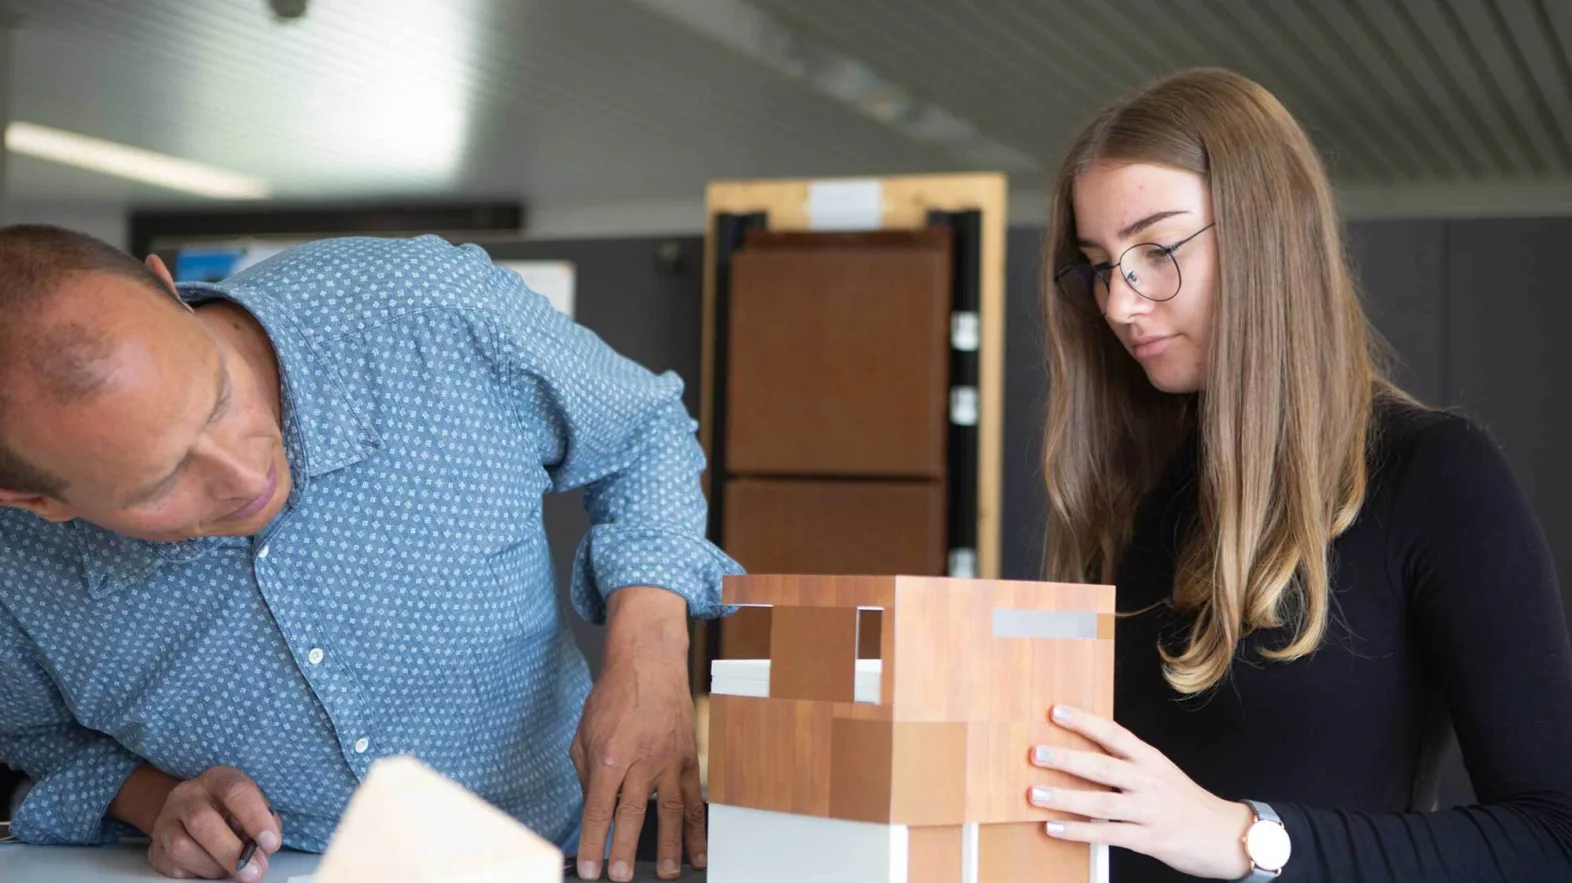 An apprentice and her colleague work on a paper model